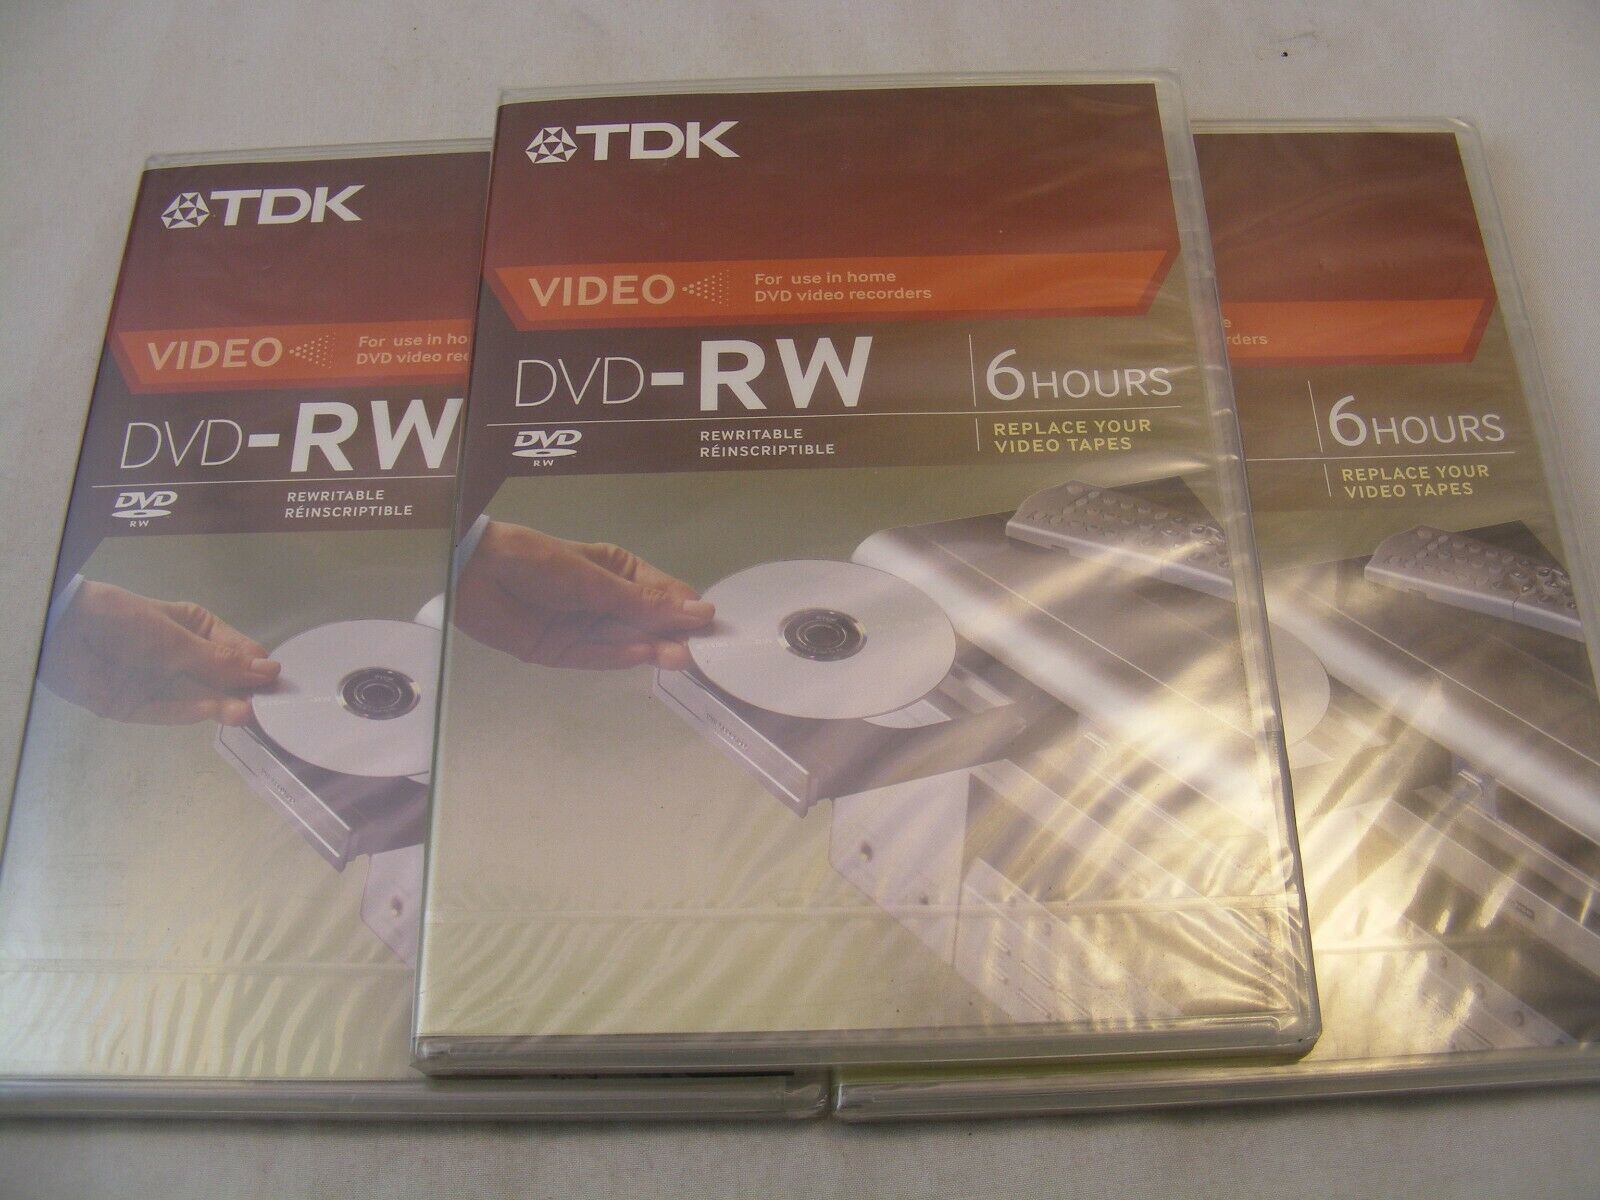 Primary image for SET OF 3 TDK Video 4X DVD+RW 6 Hours 1PK W/ Movie Box Case